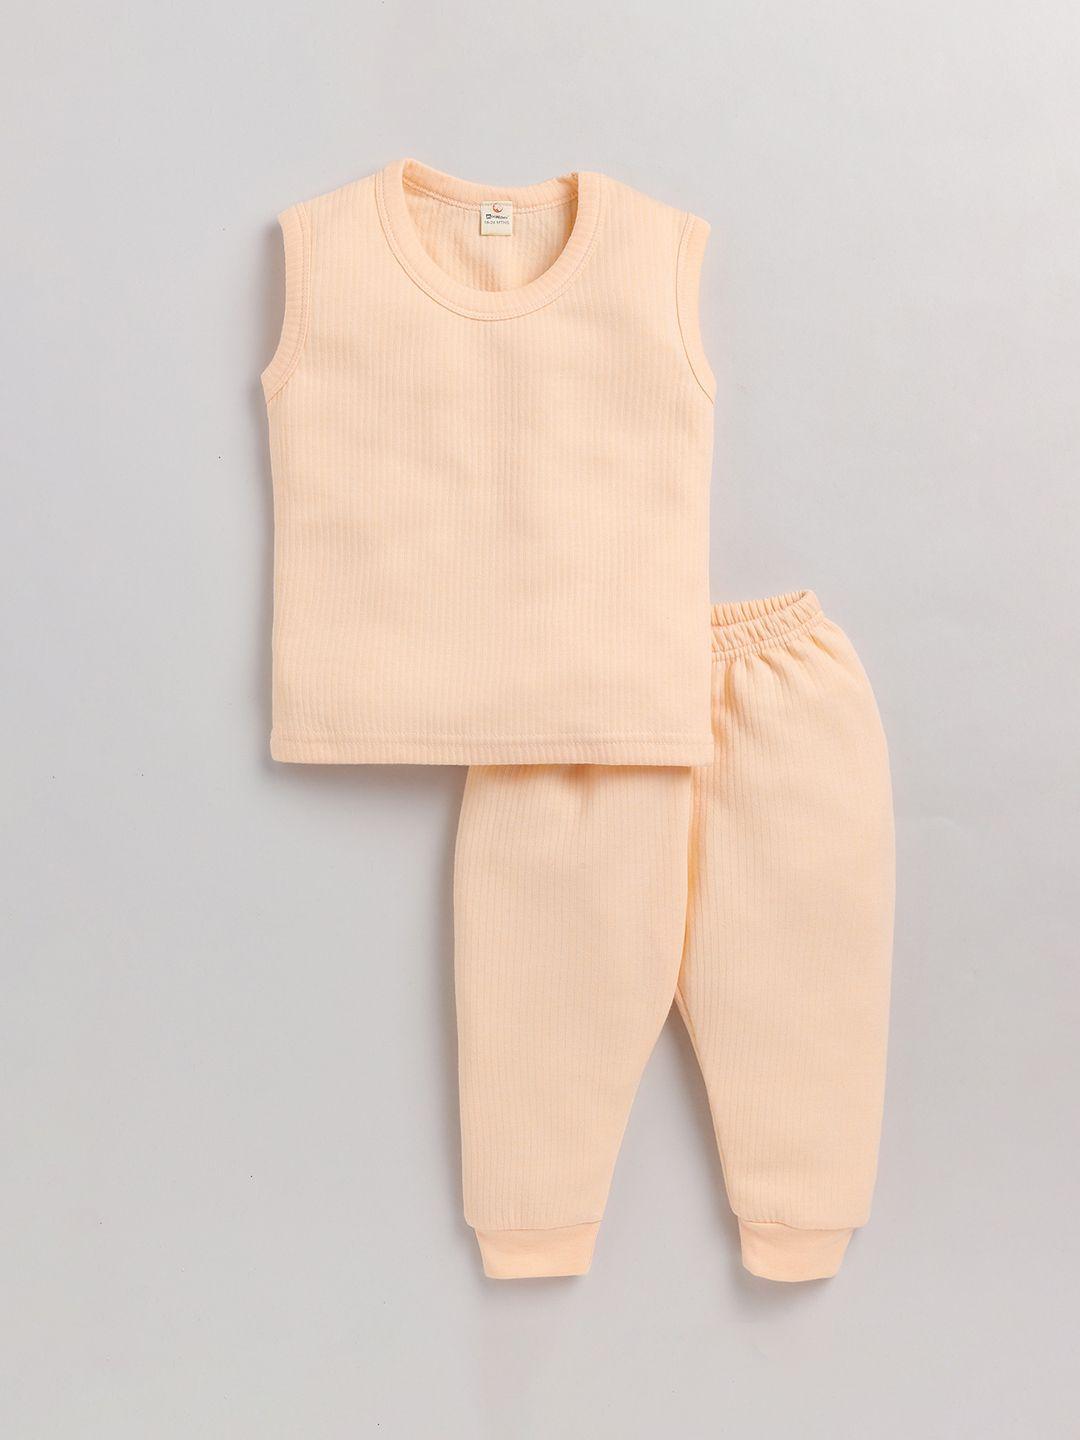 moonkids boys peach colored striped thermal set